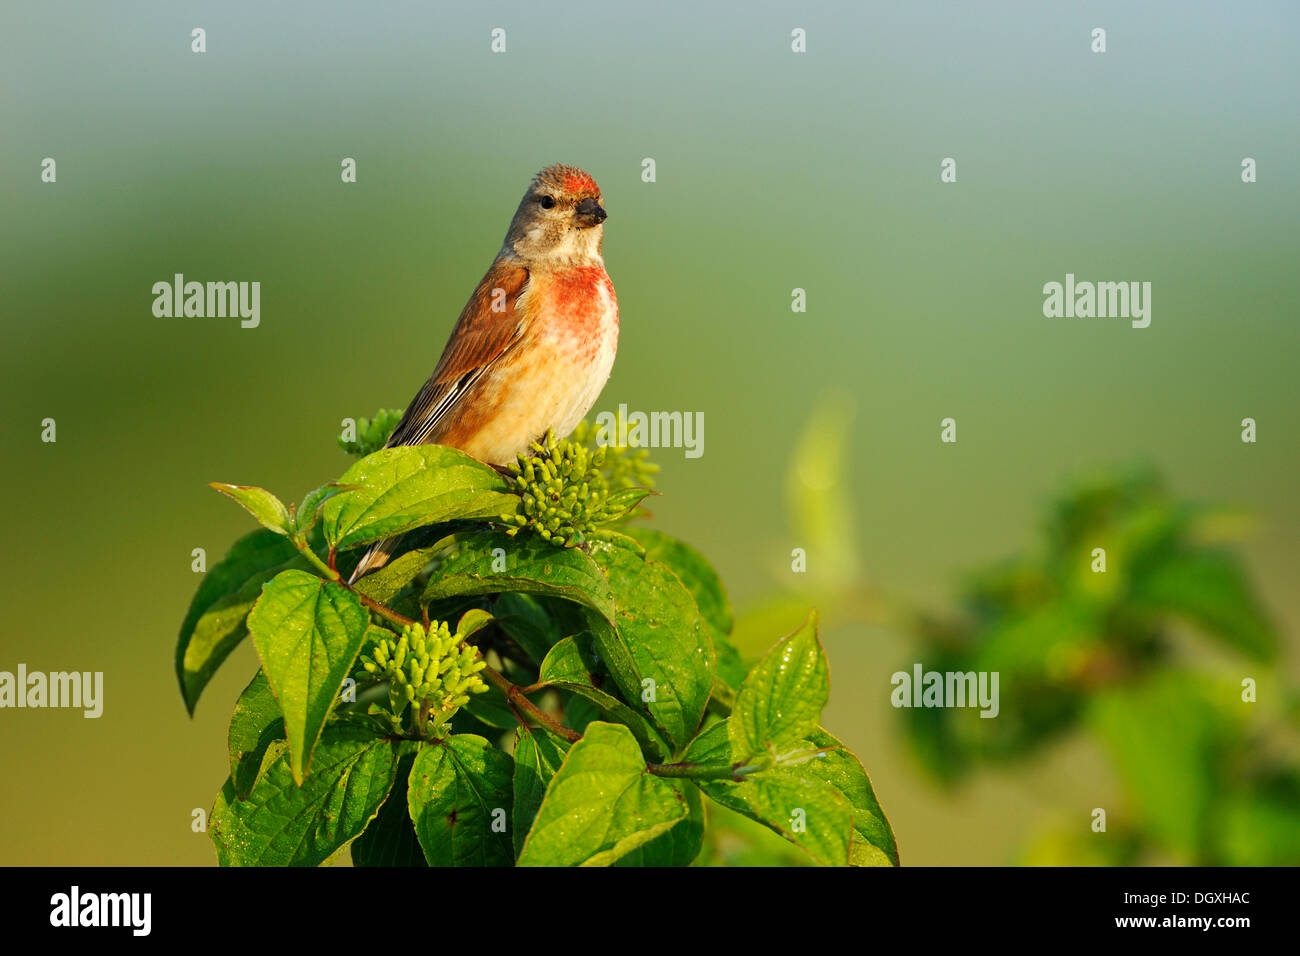 Common linnet (Carduelis cannabina), perched on a bush Stock Photo